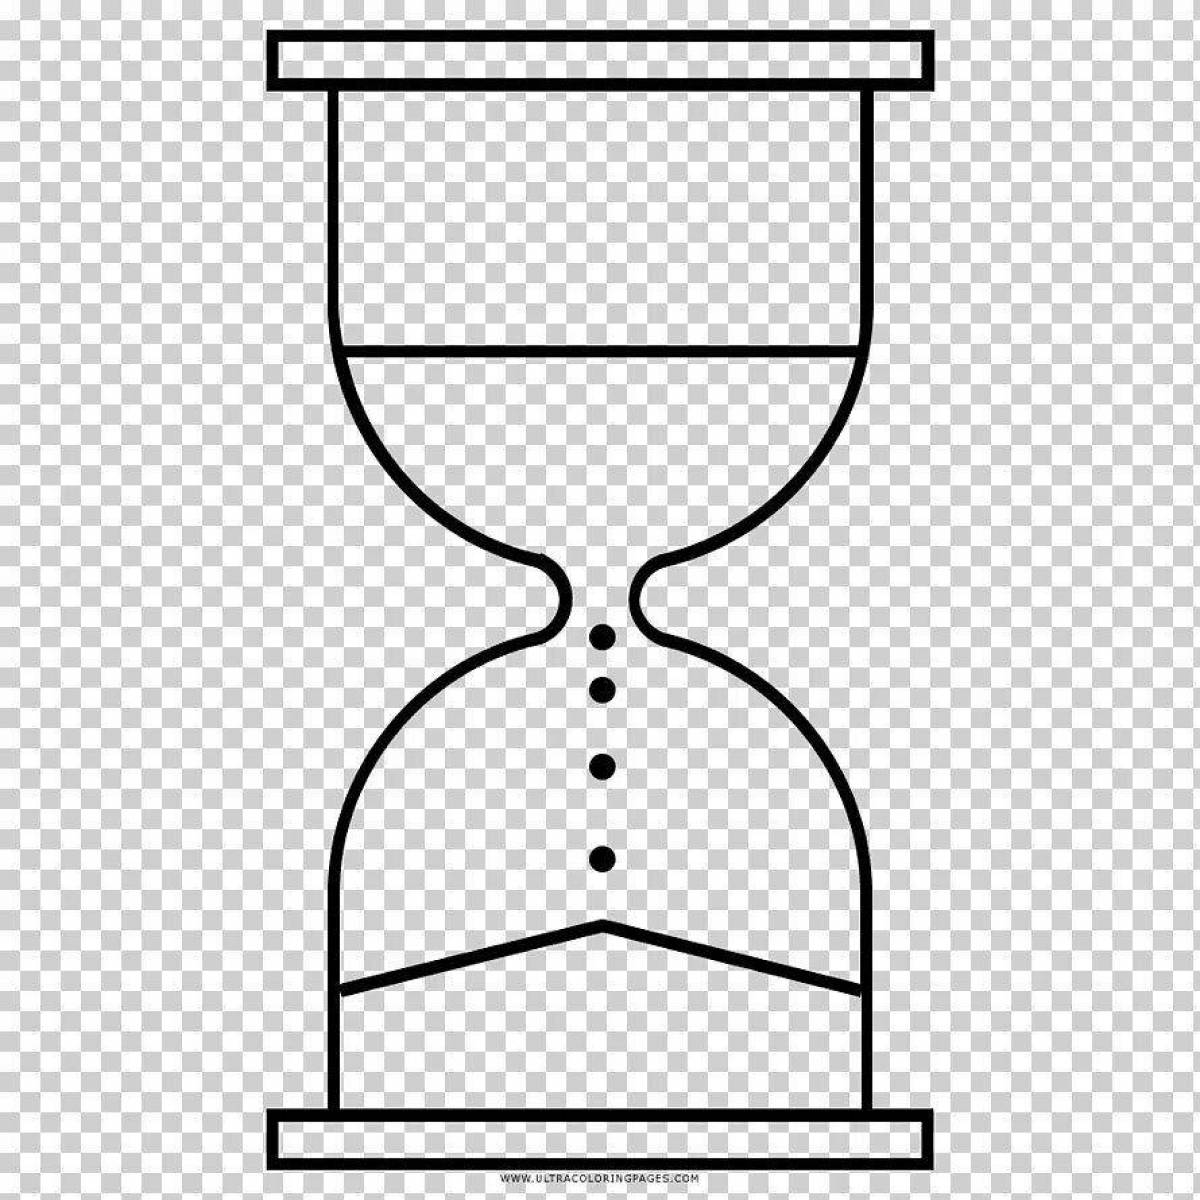 Shiny hourglass coloring page